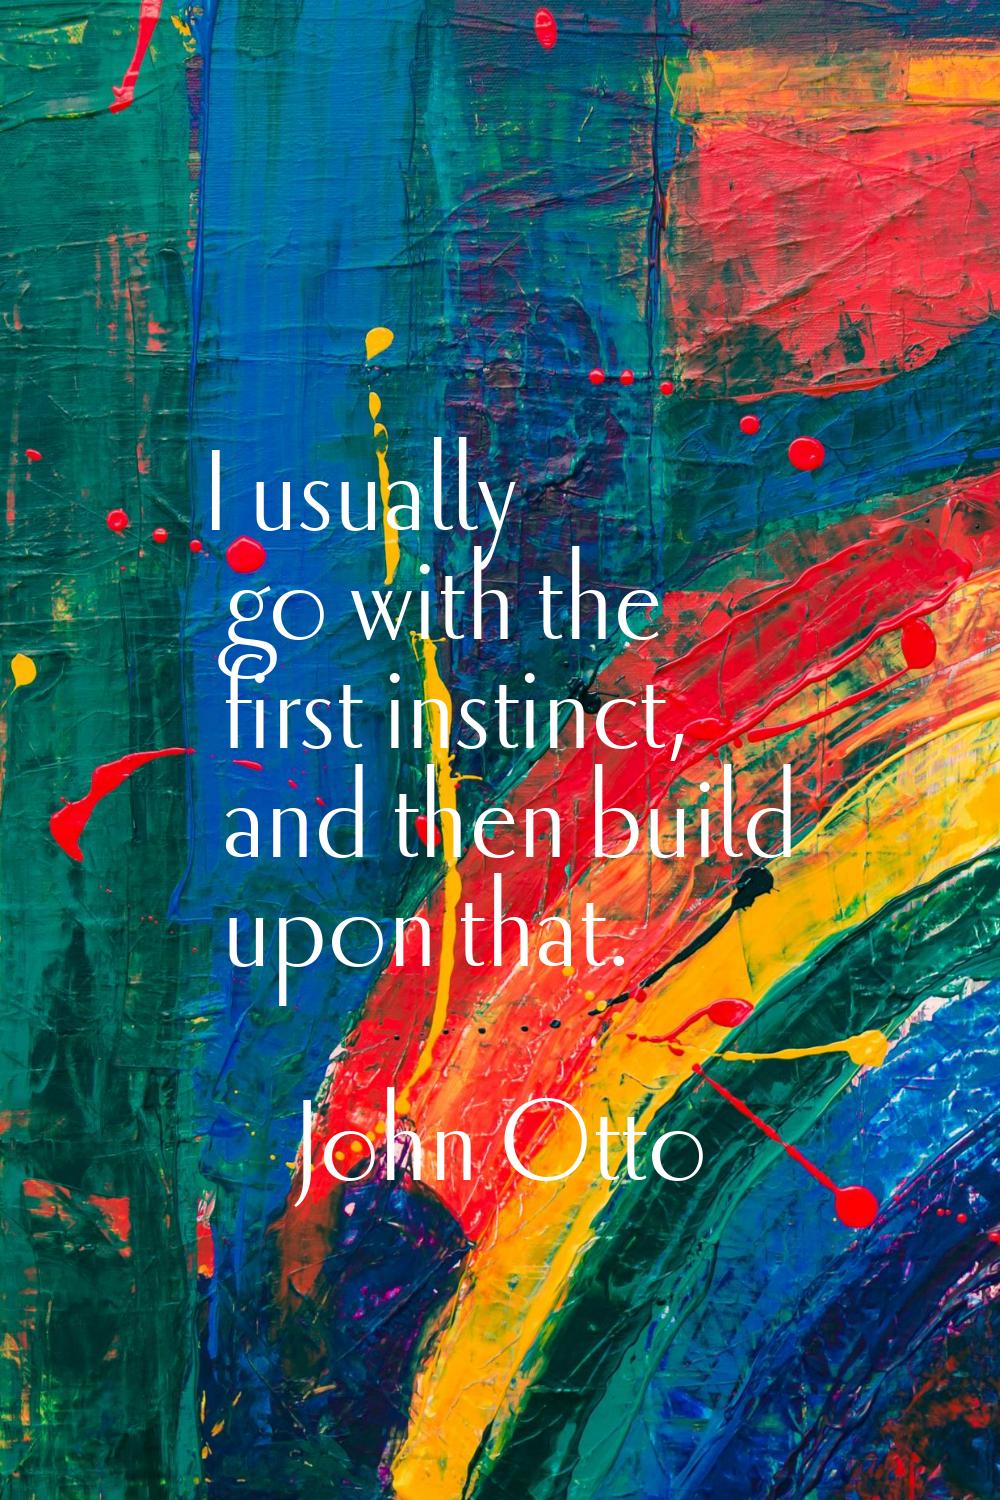 I usually go with the first instinct, and then build upon that.